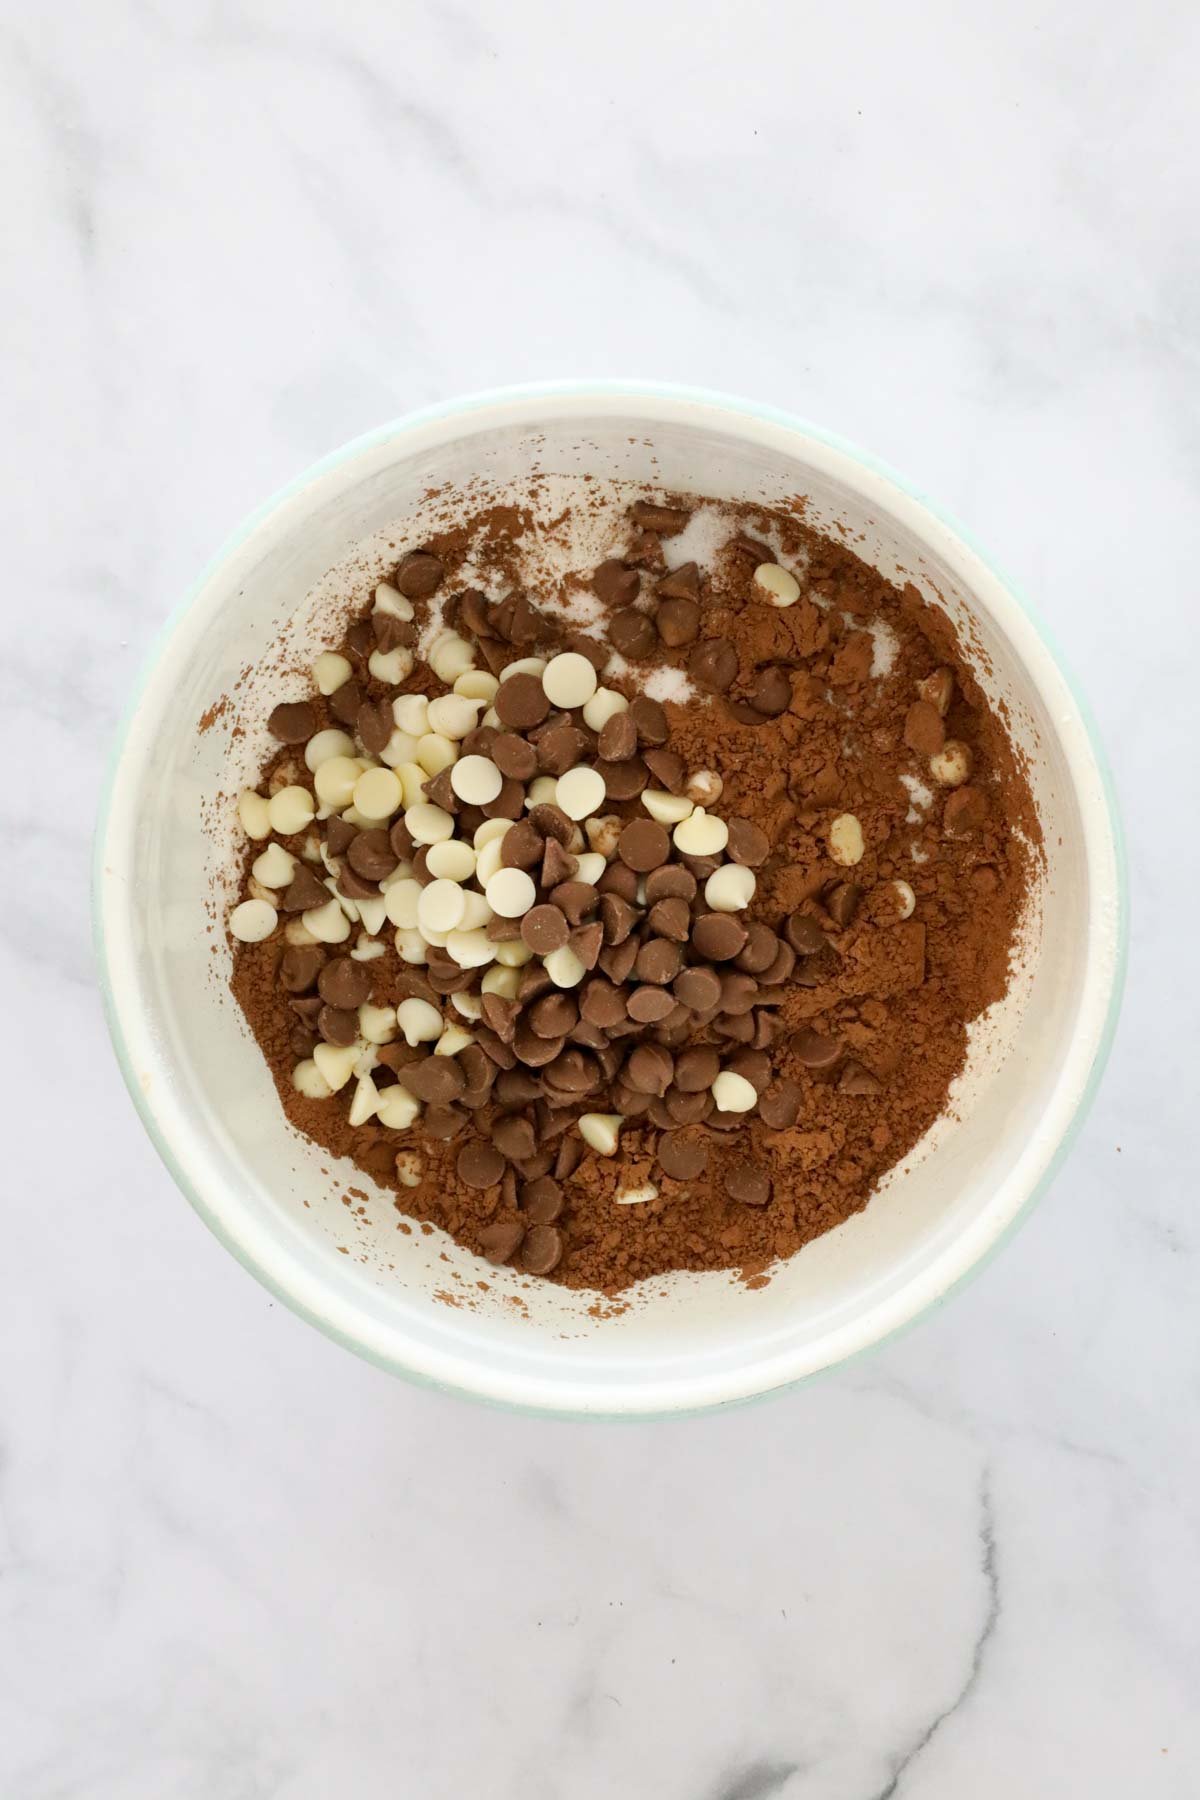 Chocolate chips, cocoa powder and sugar added to flour in a mixing bowl.